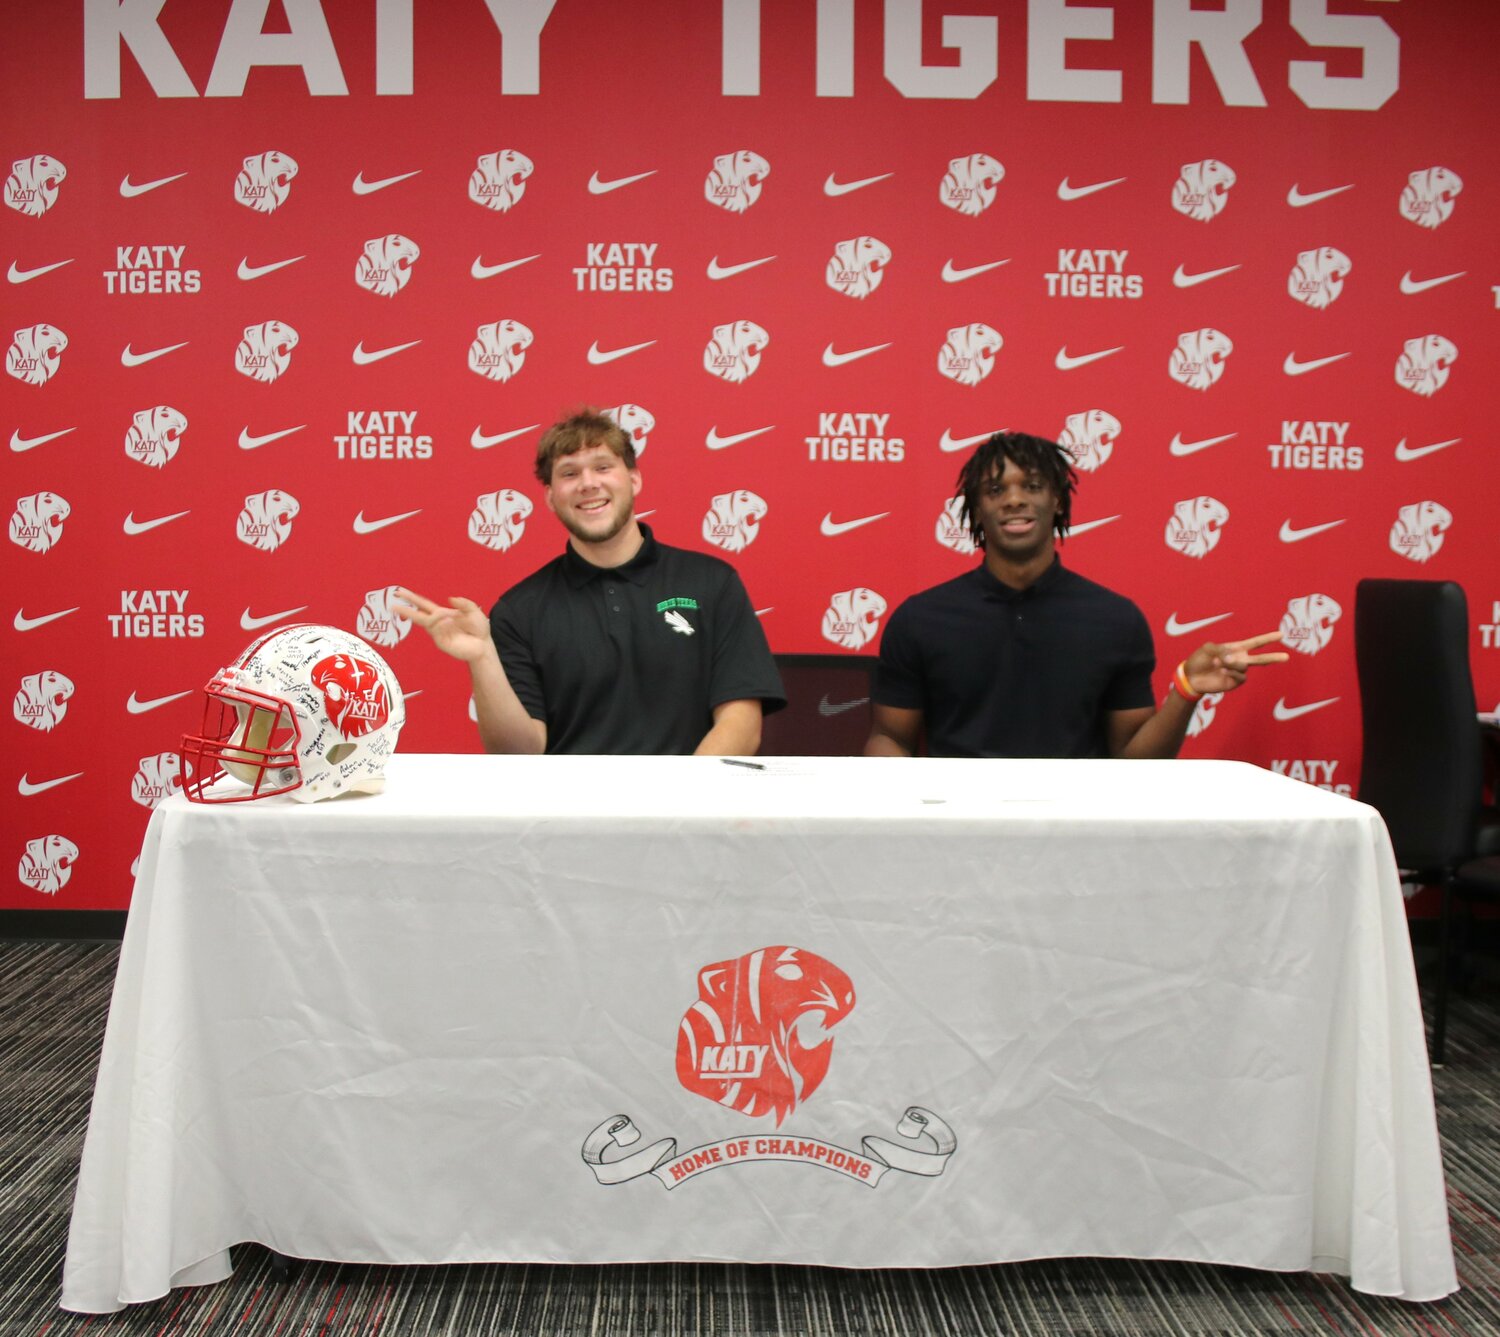 Luke Carter and Dakyus Brinkley pose for a photo during the signing ceremony at Katy High School.